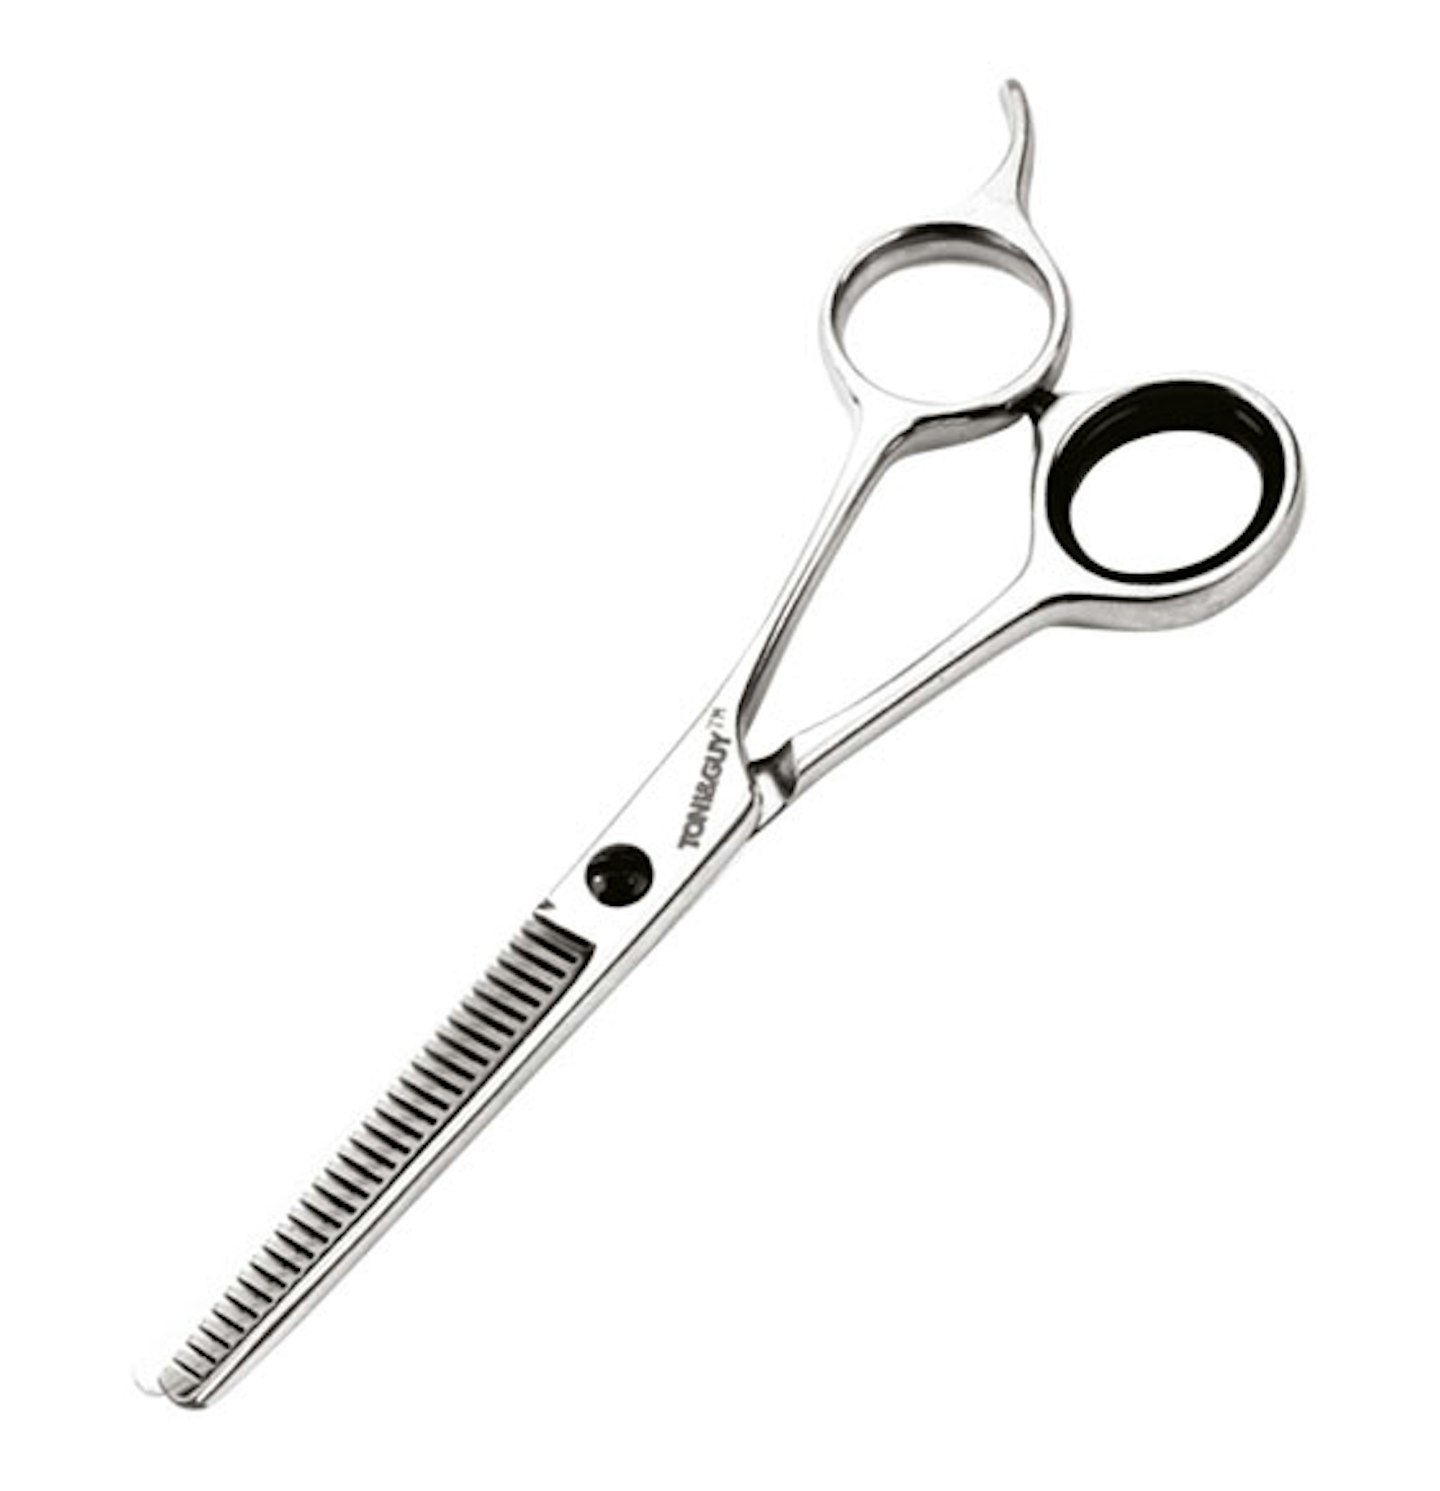 ReaNea Stainless Steel Hair Cutting Shears and Thinning Shears 2 pieces set